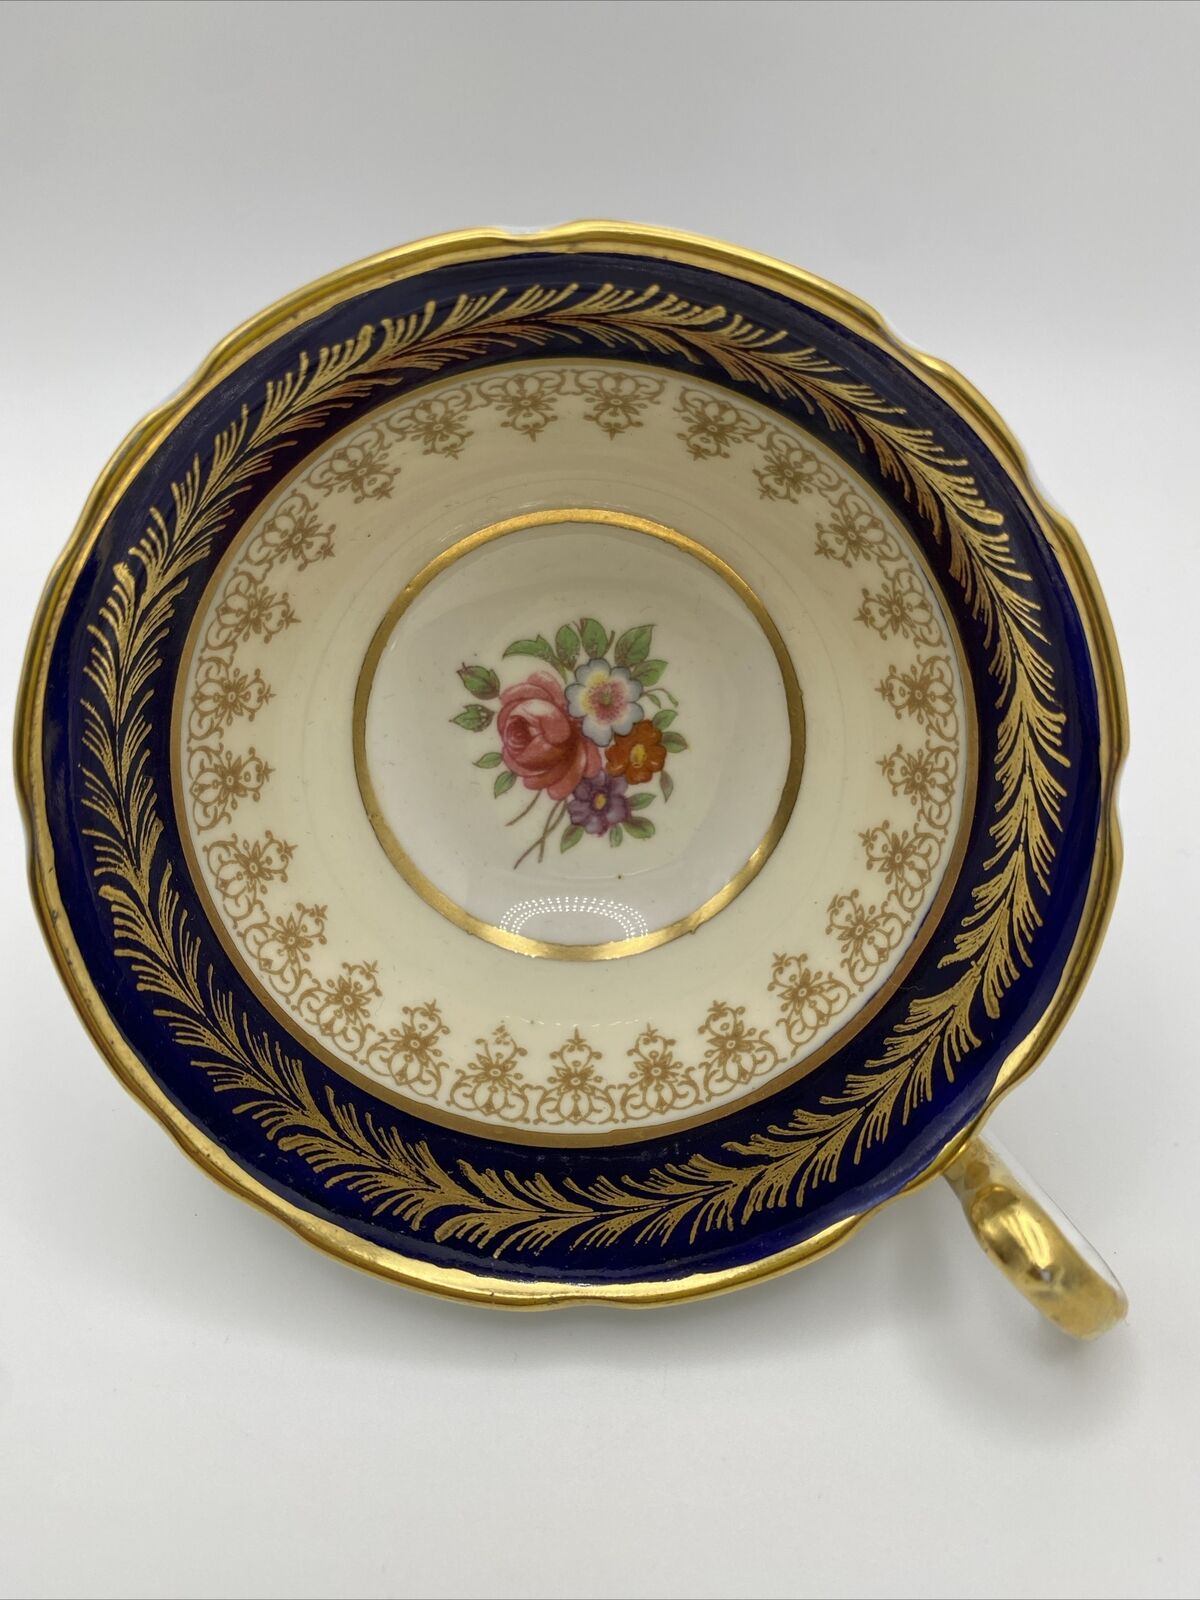 Aynsley Tea Cup In Cobalt Blue With Floral Pattern Gold Gilt, No Saucer